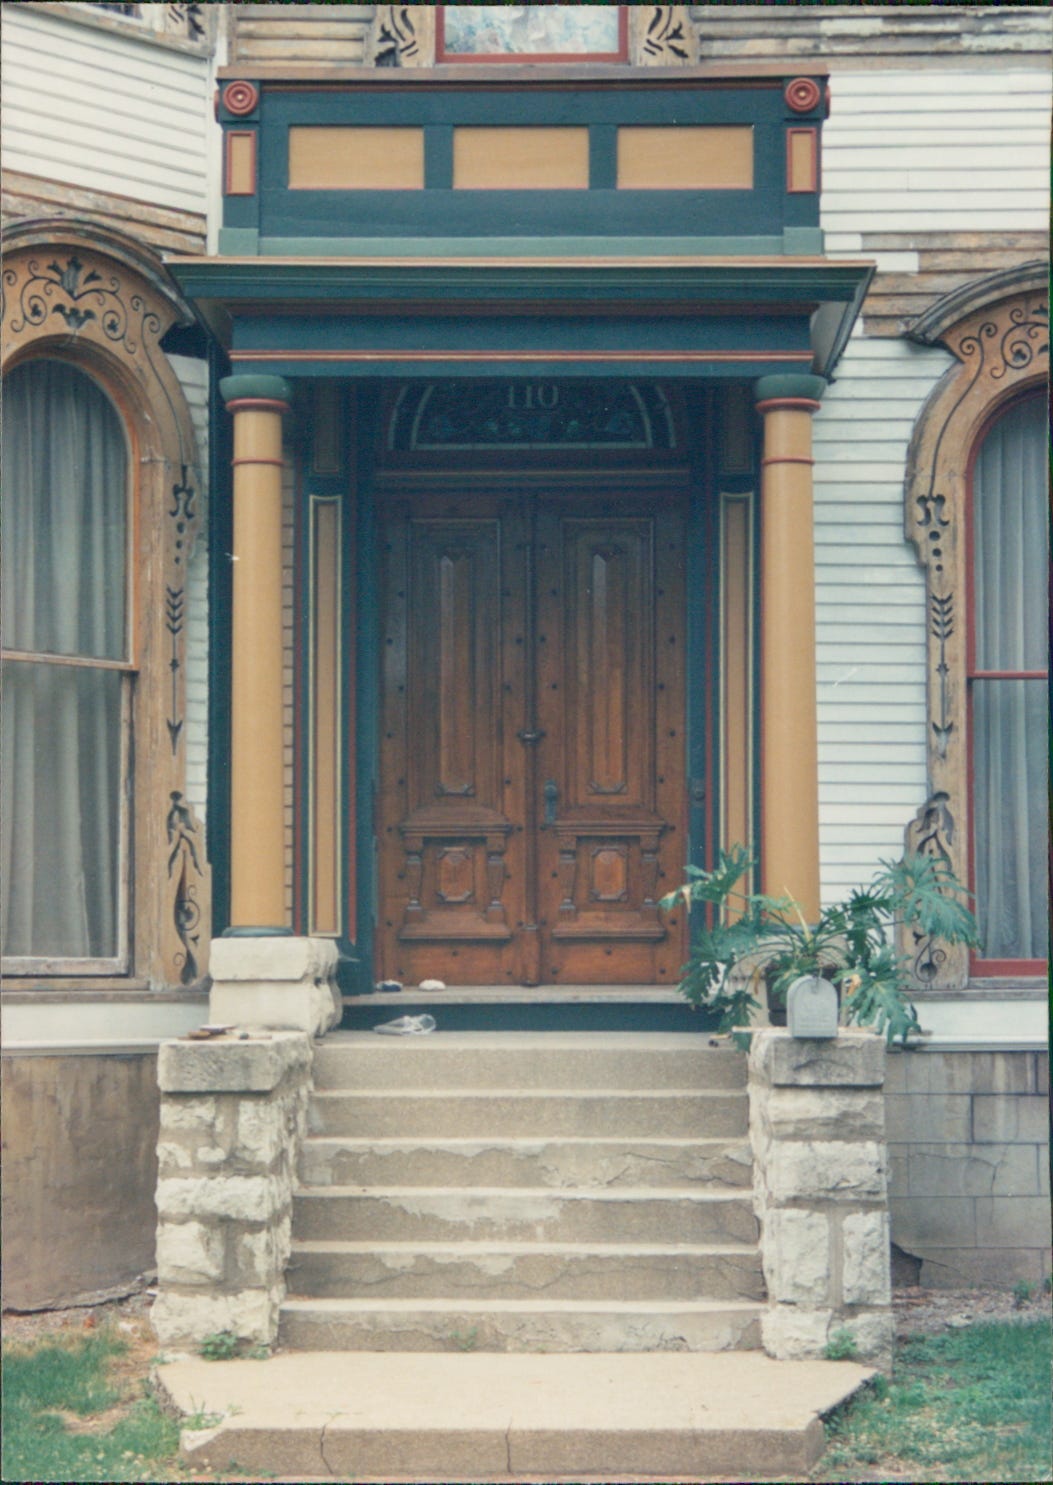 Front entrance of Second Empire Victorian home with ornate walnut double entryway doors framed by columns and roof. The woodwork around the entrance is painted Victorian yellow, colonial red, shutter green, and olive.